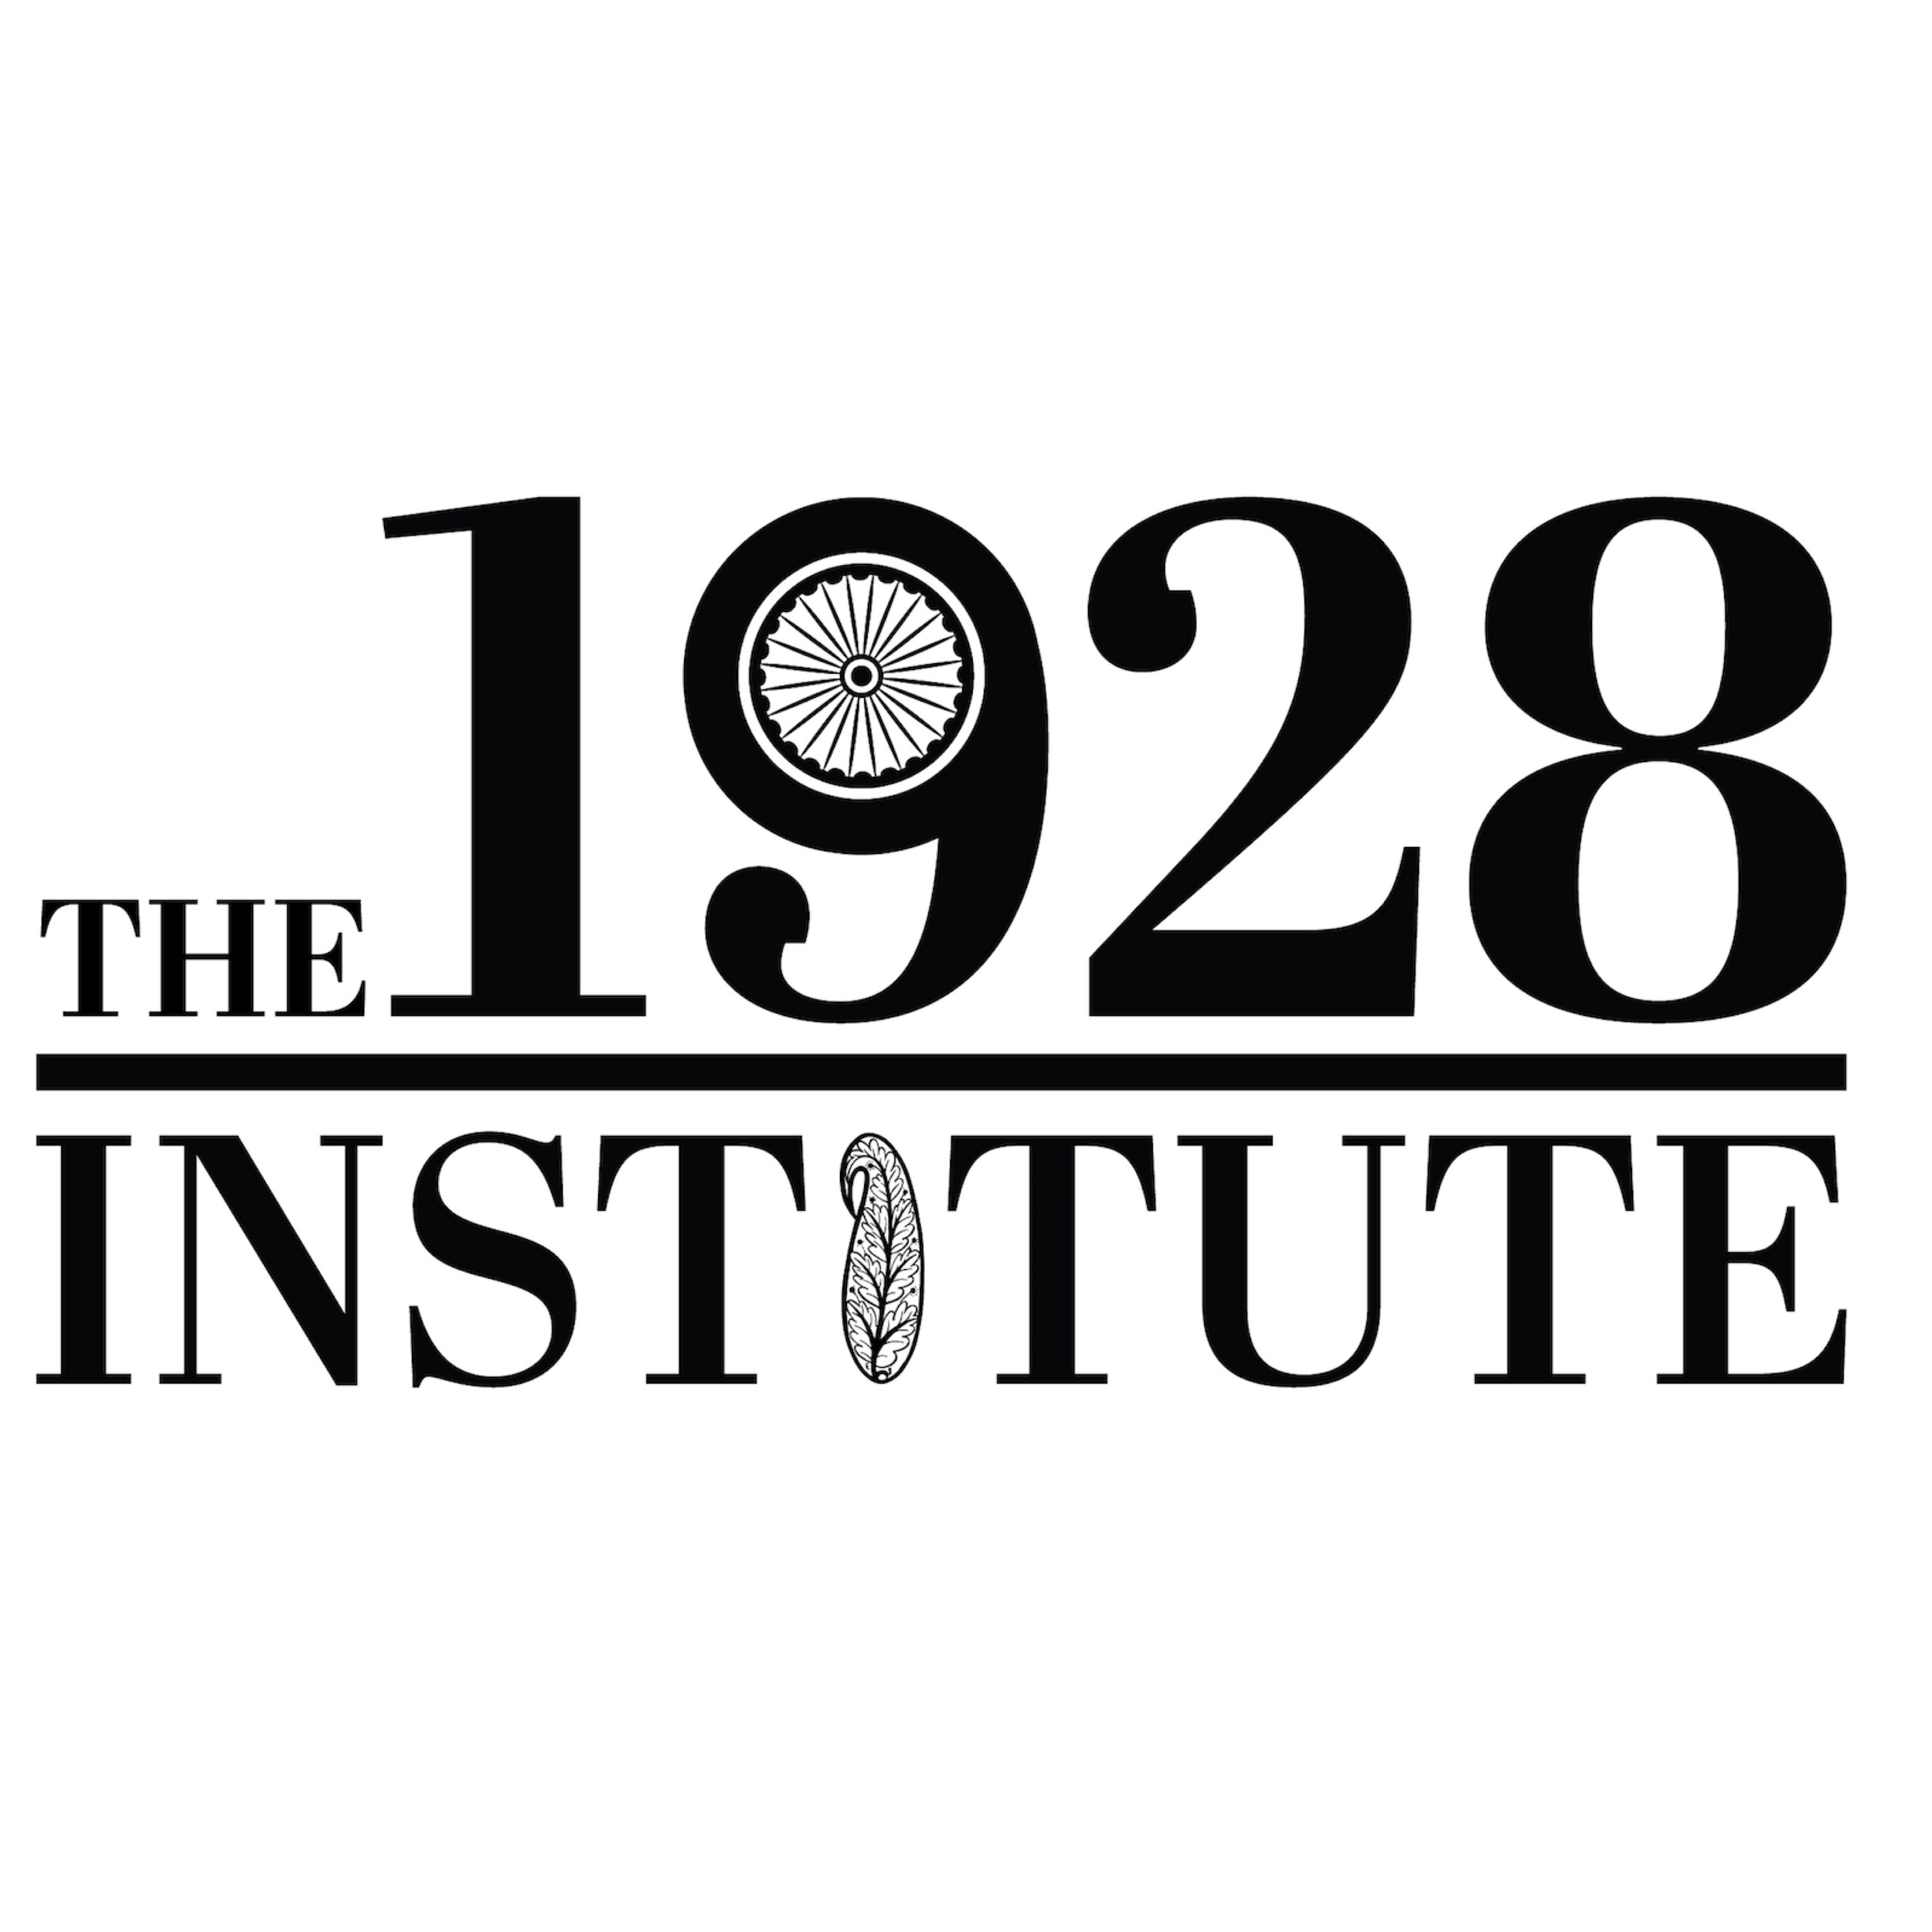 Story — The 1928 Institute